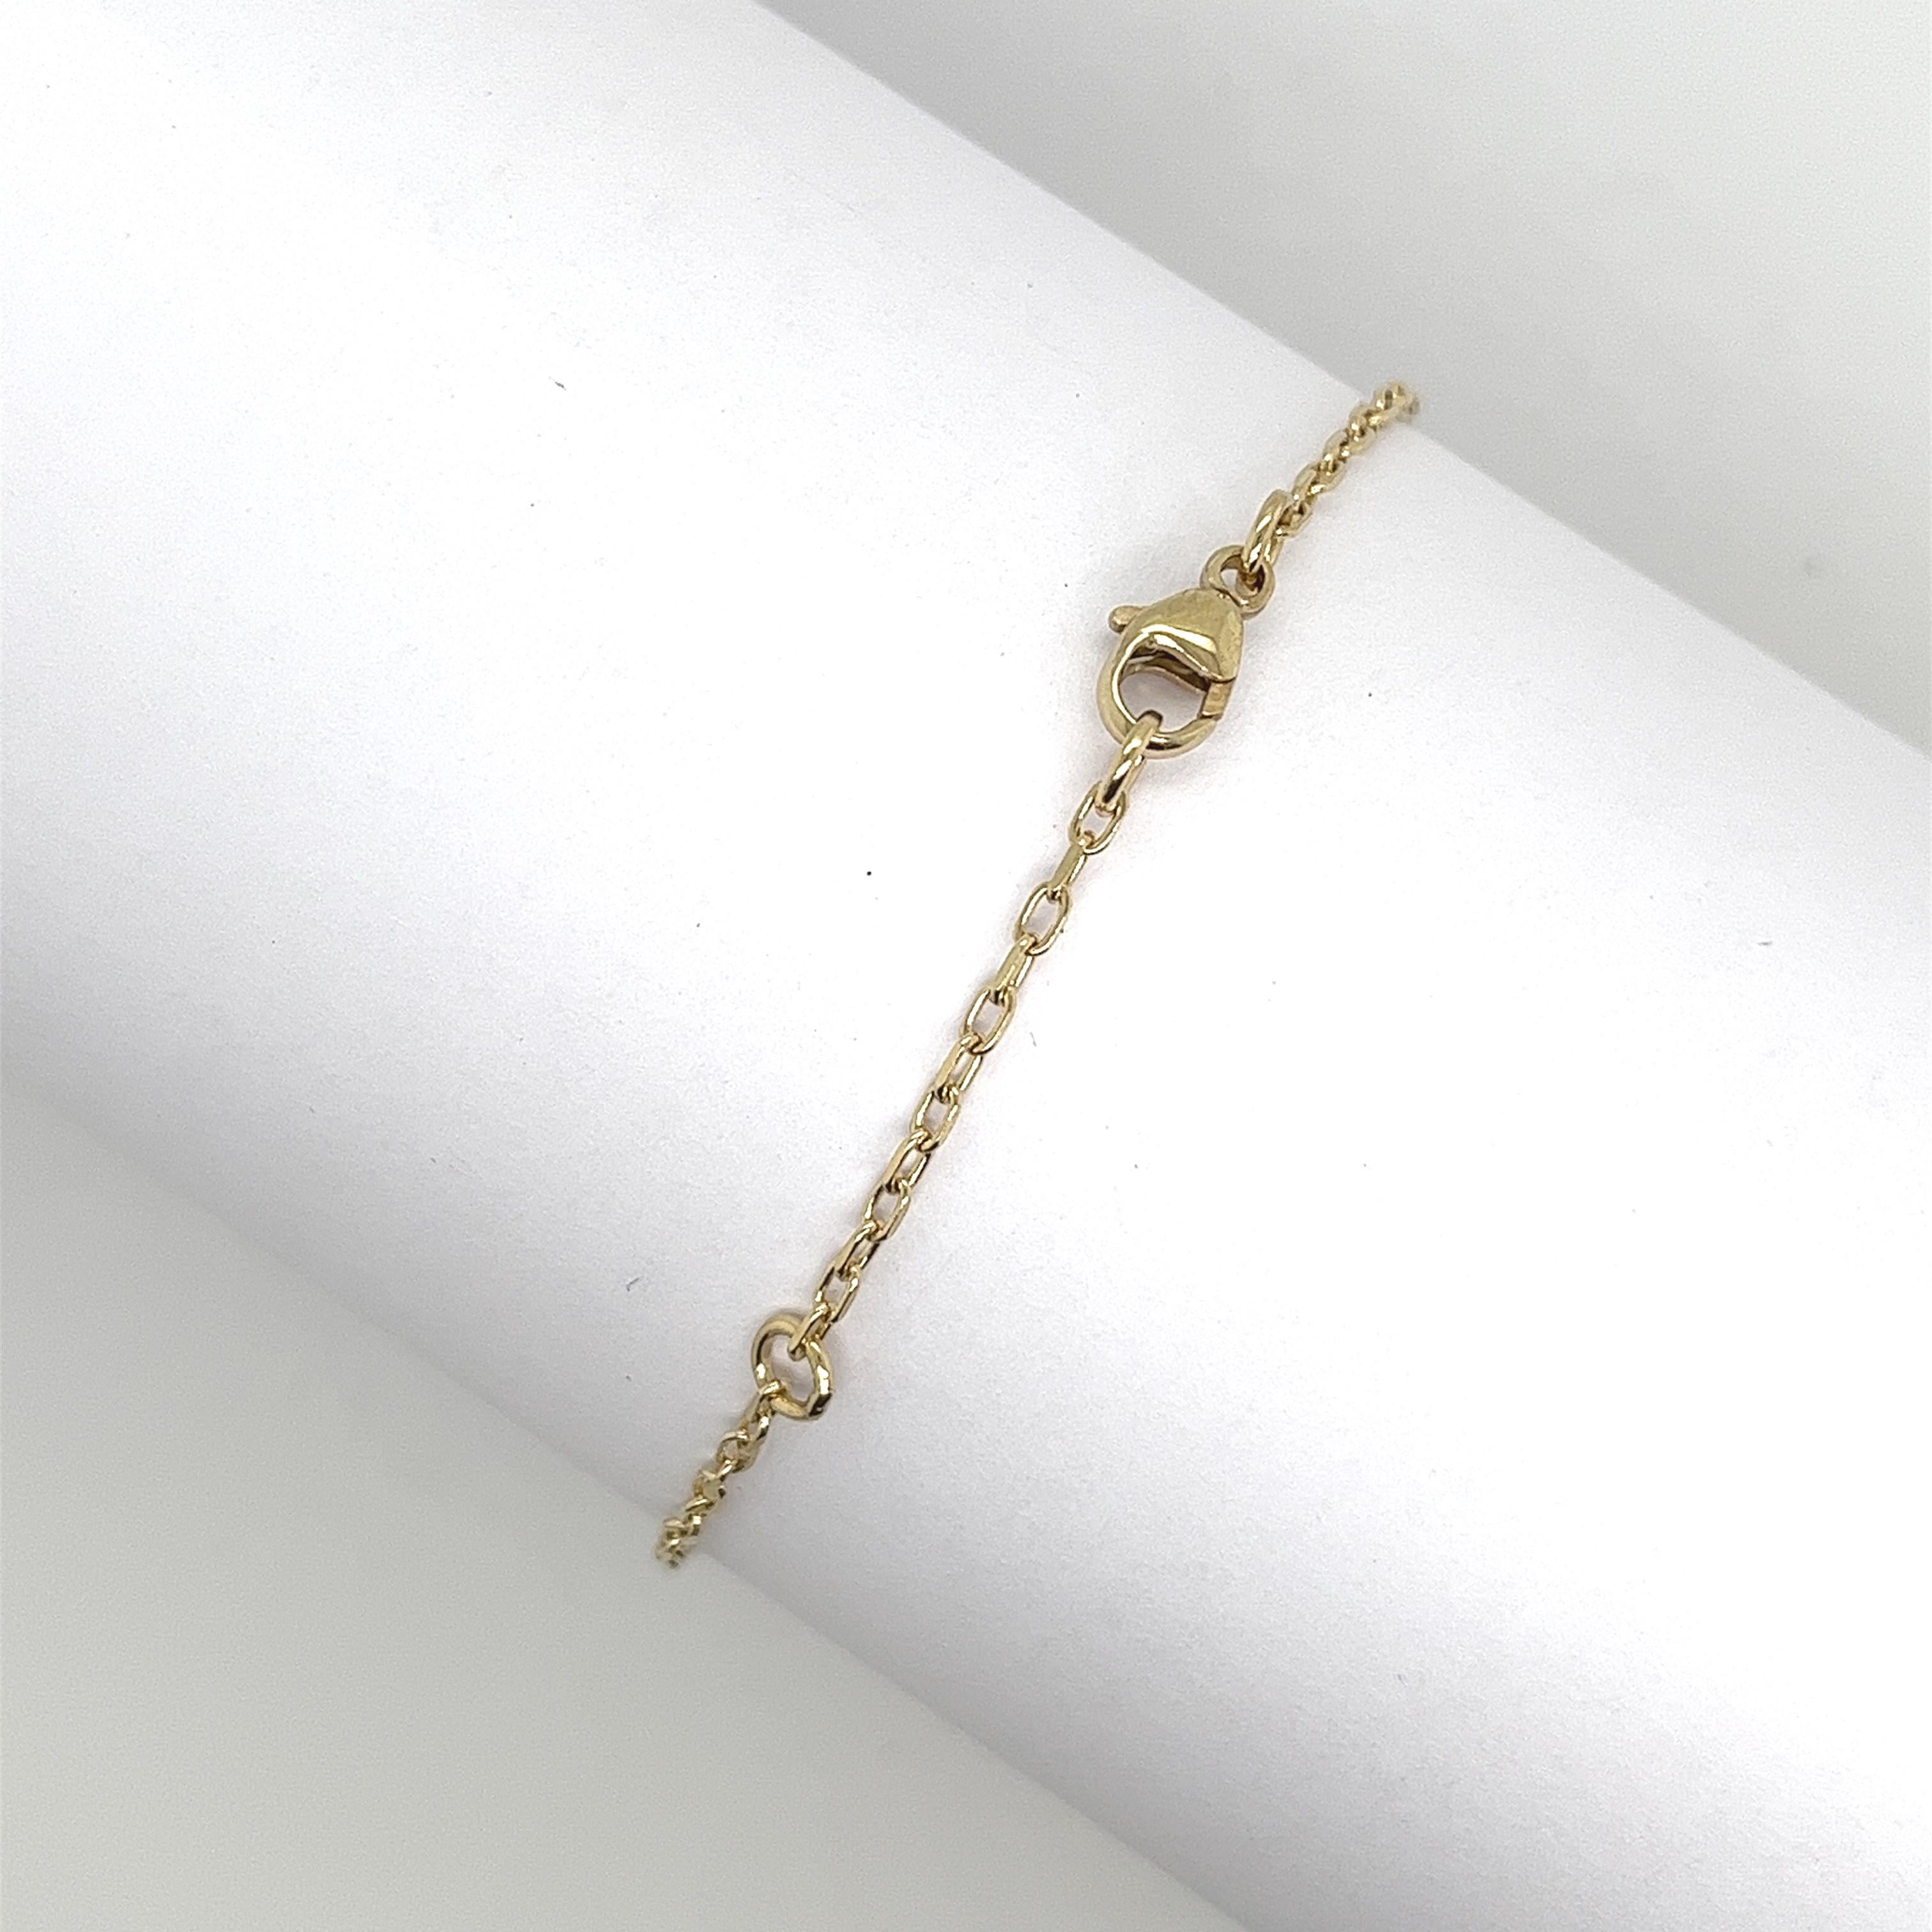 Made by Jewellery Cave- our exquisite 0.08ct diamond set and round citrine evil eye bracelet—
an enchanting fusion of style and symbolism. 
Crafted in 9ct yellow gold, the centrepiece of this mesmerizing bracelet is the striking Evil Eye charm,